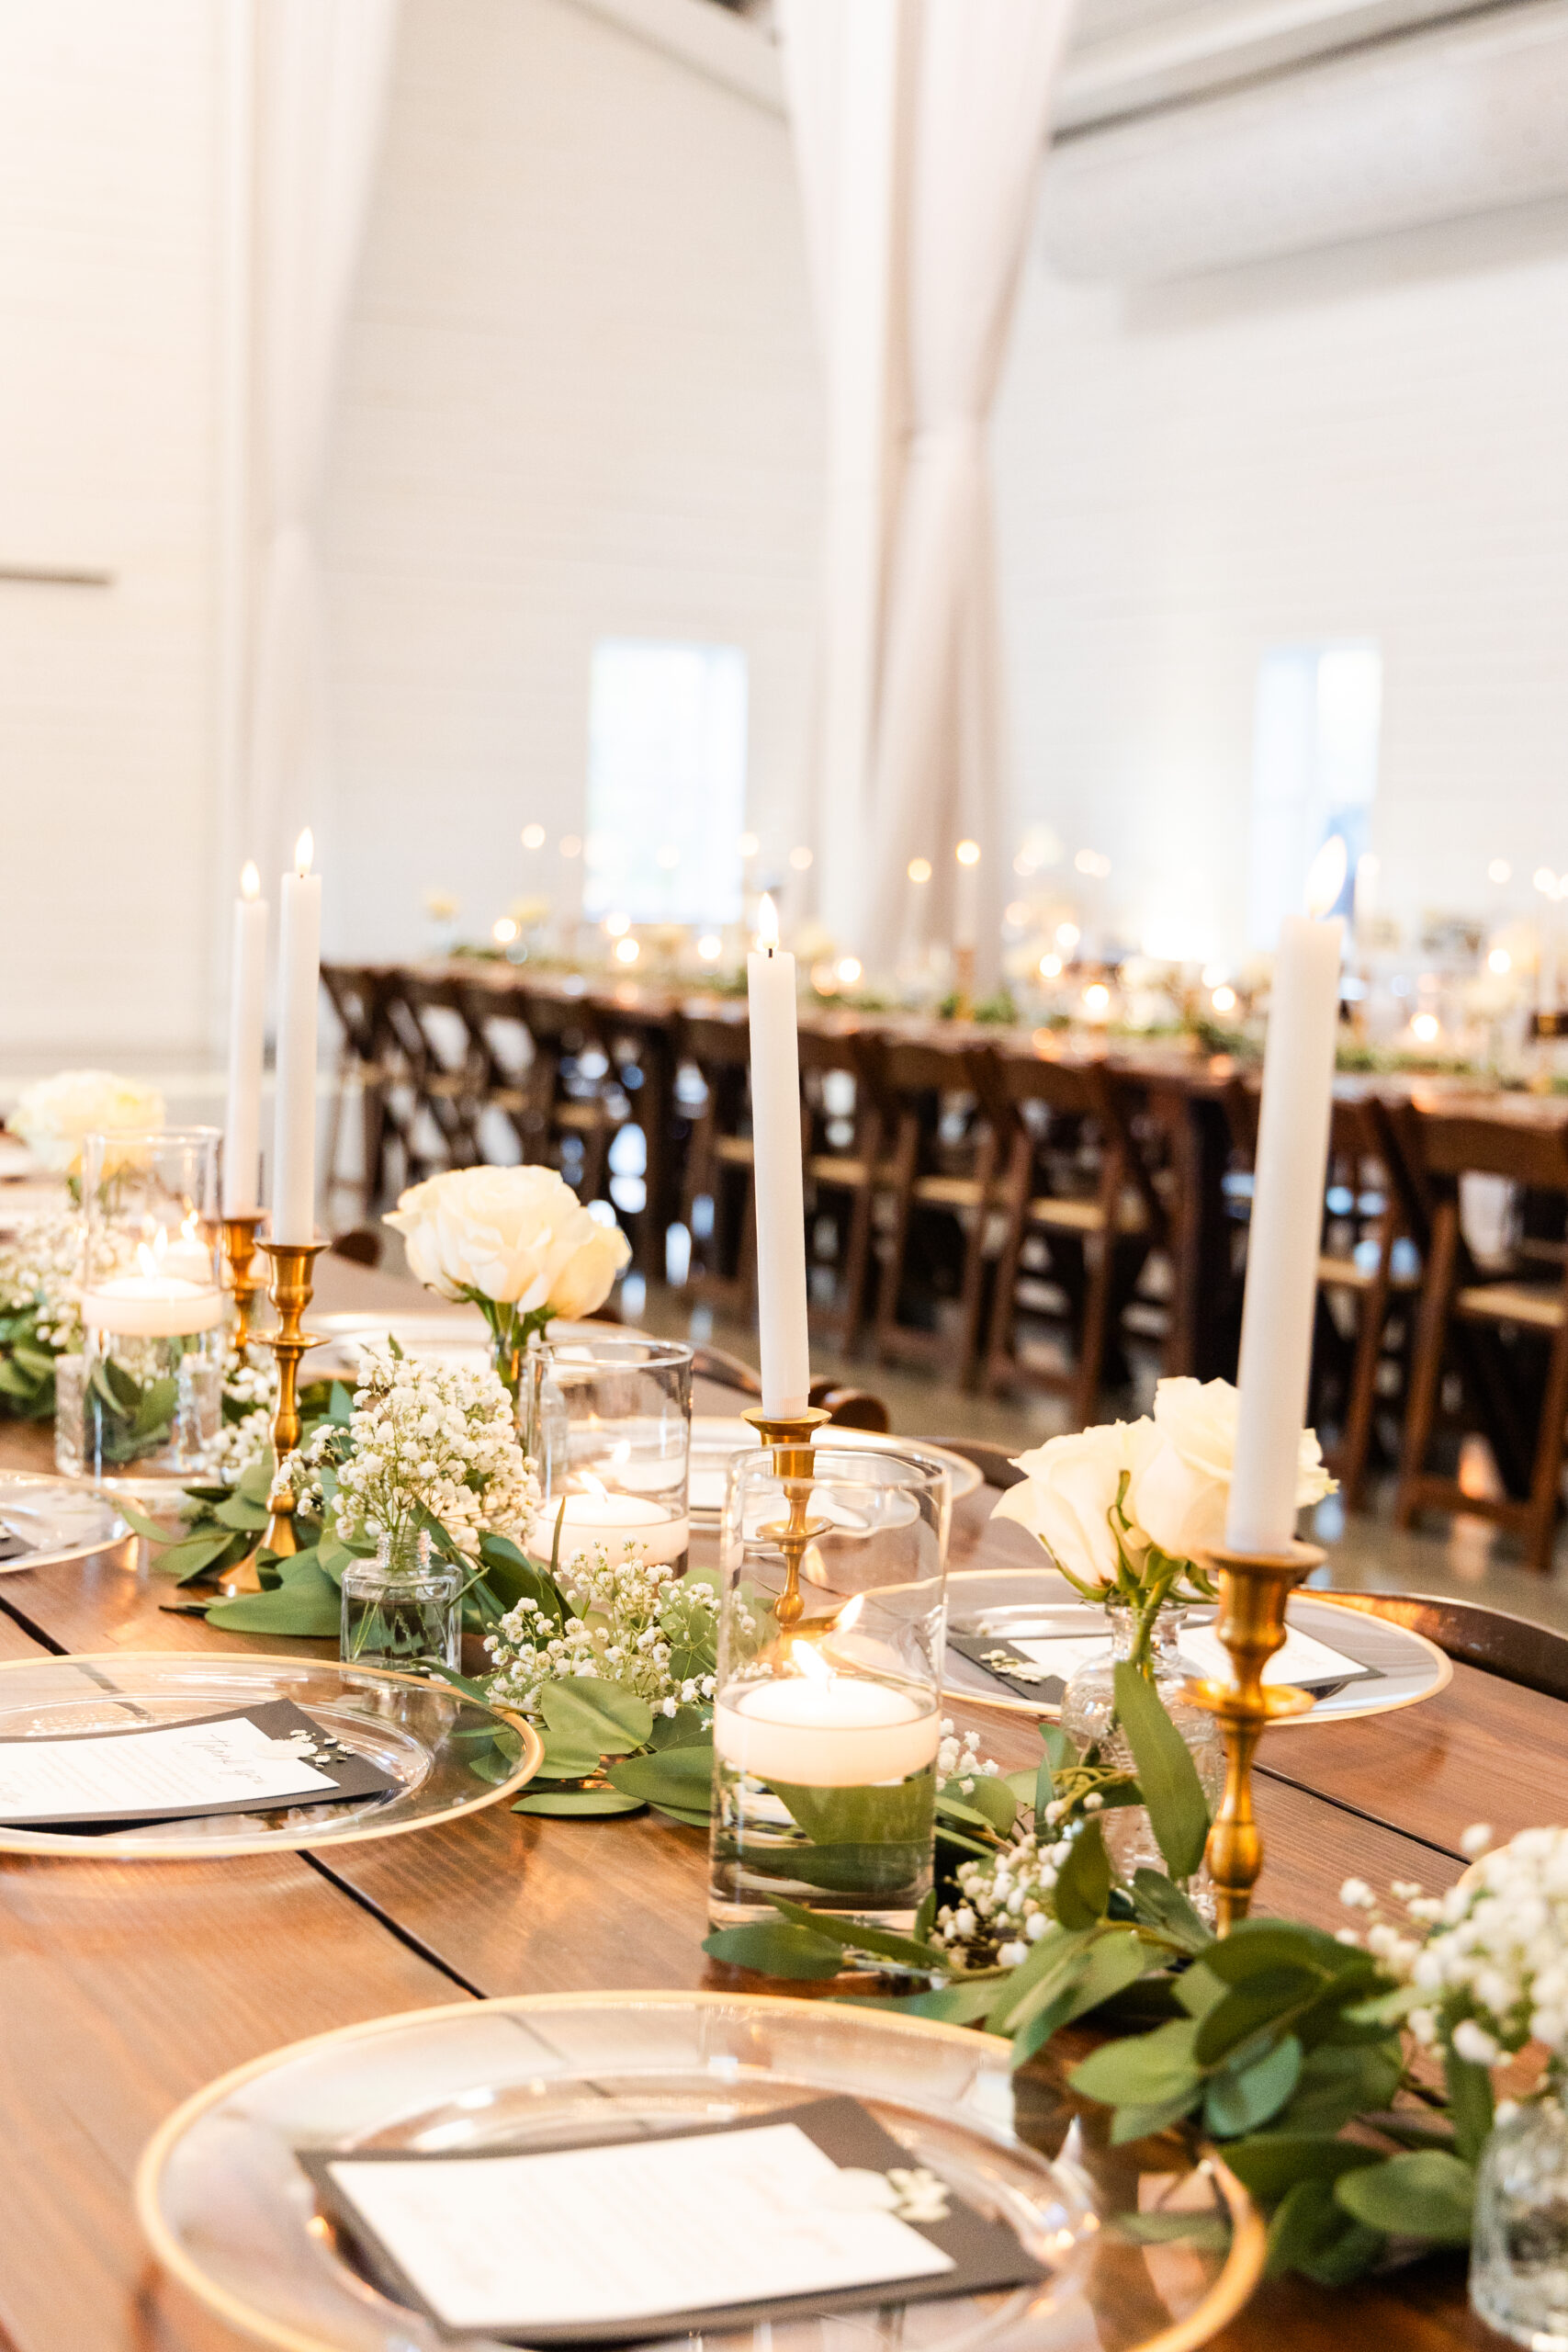 belle's venue and farms wedding detail photos by jaime hausler photography